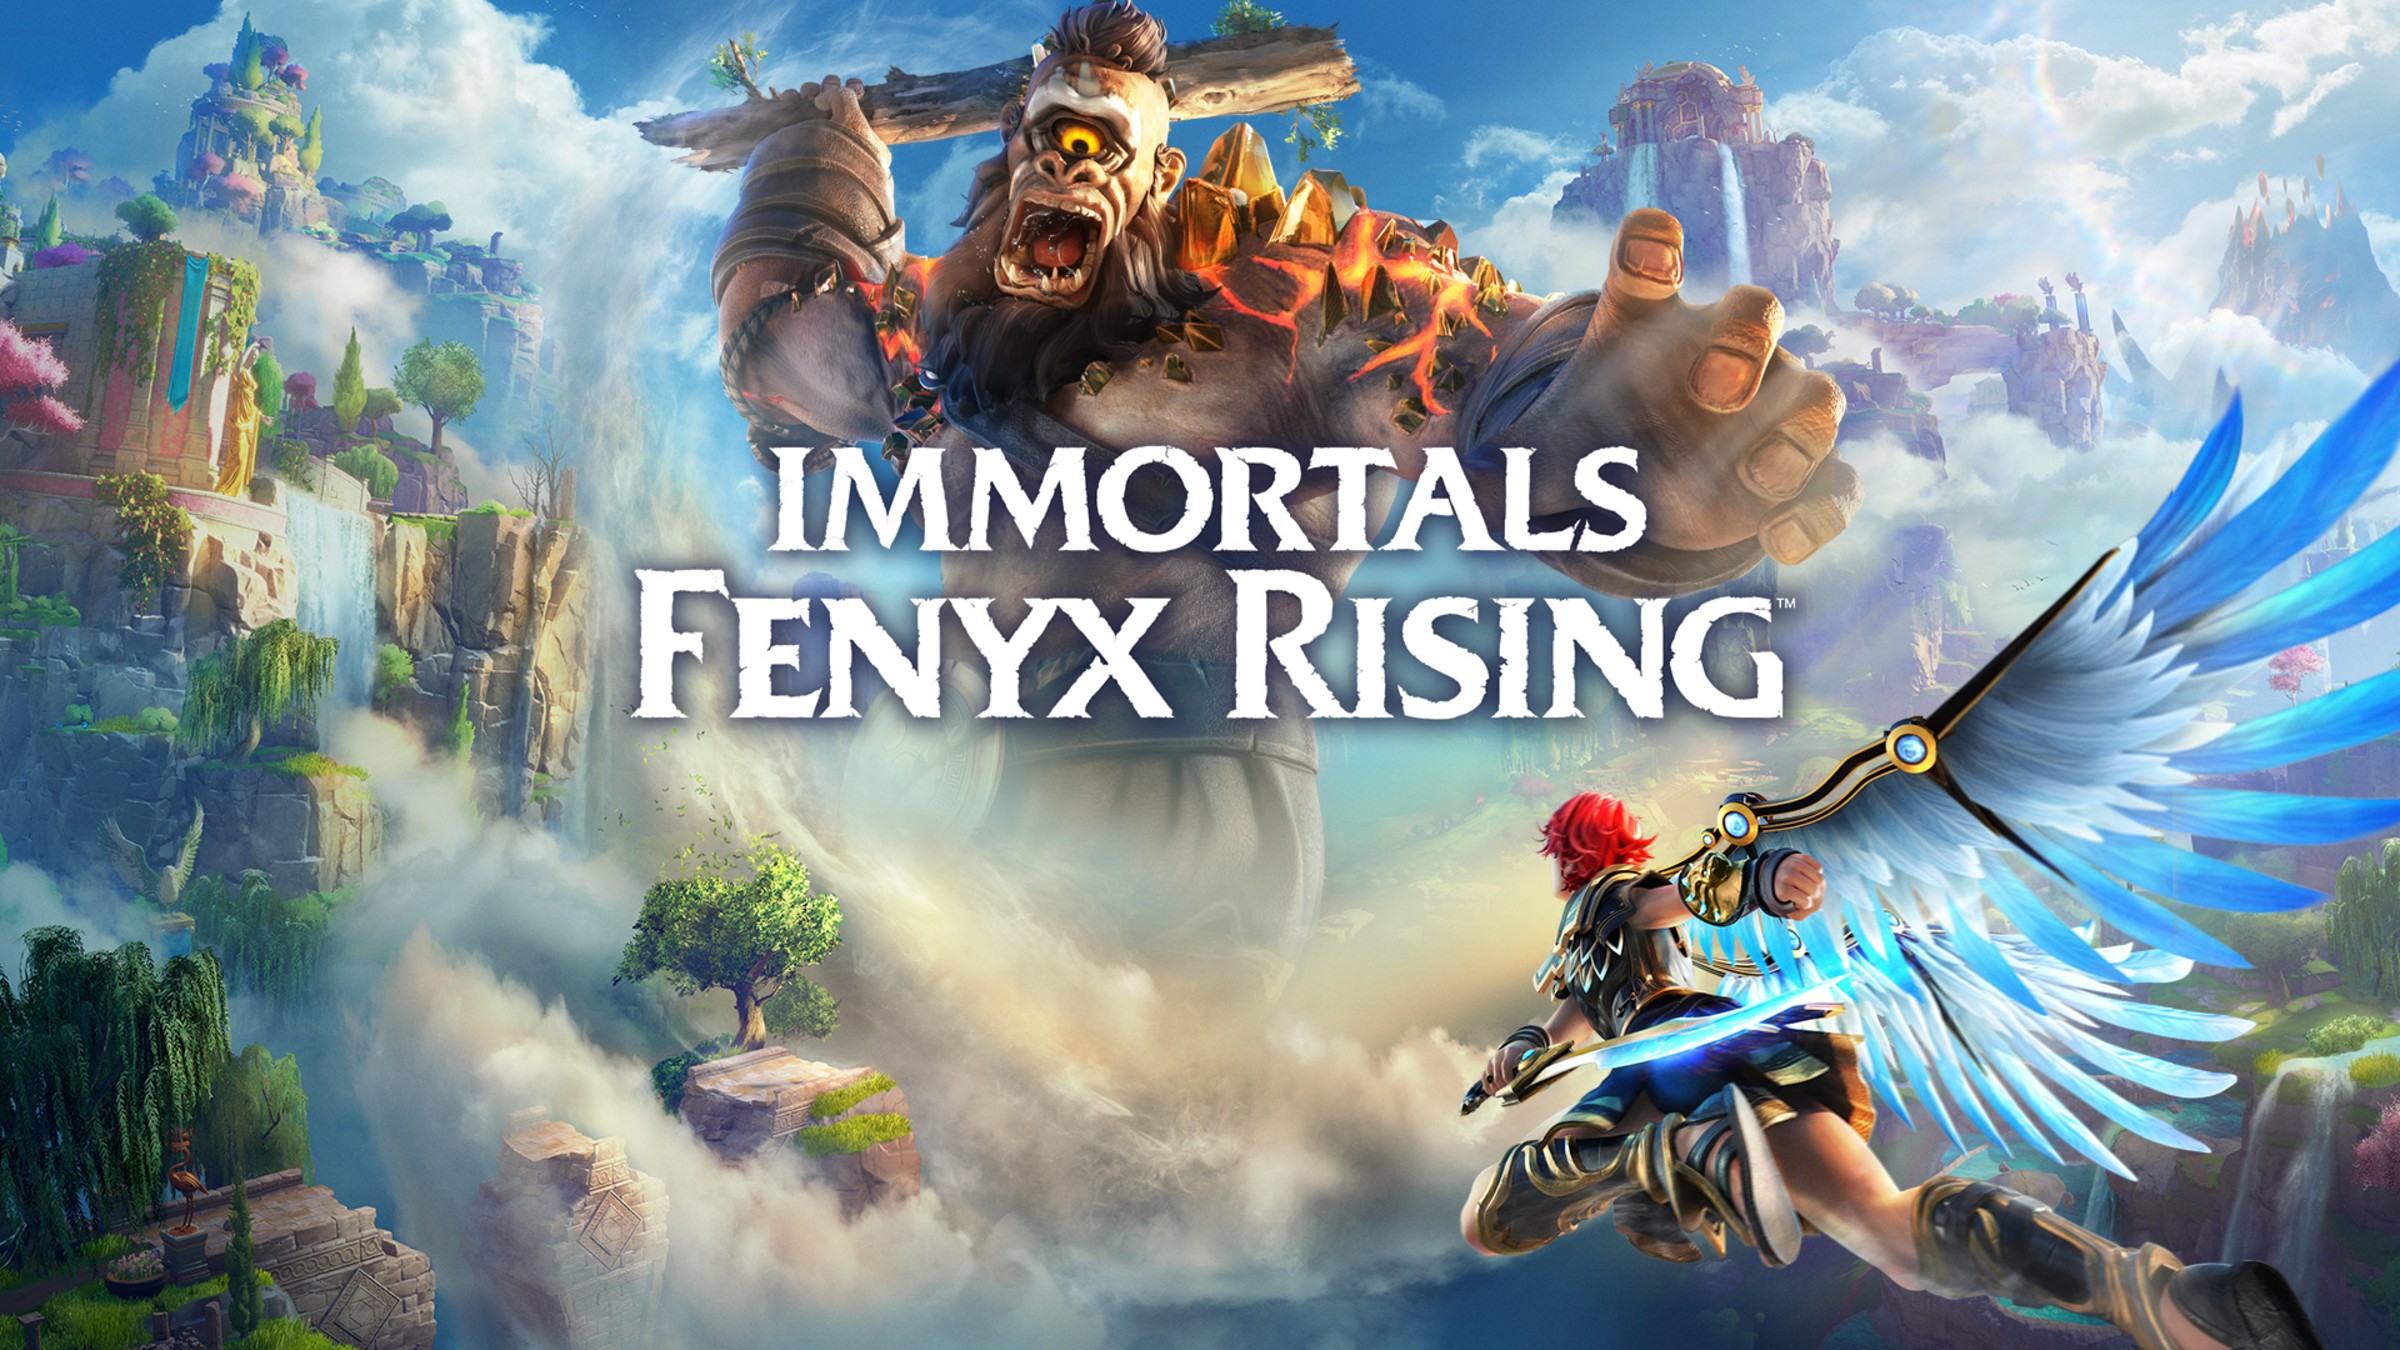 Immortals Site Rising™ Nintendo - for Fenyx Switch Official Nintendo